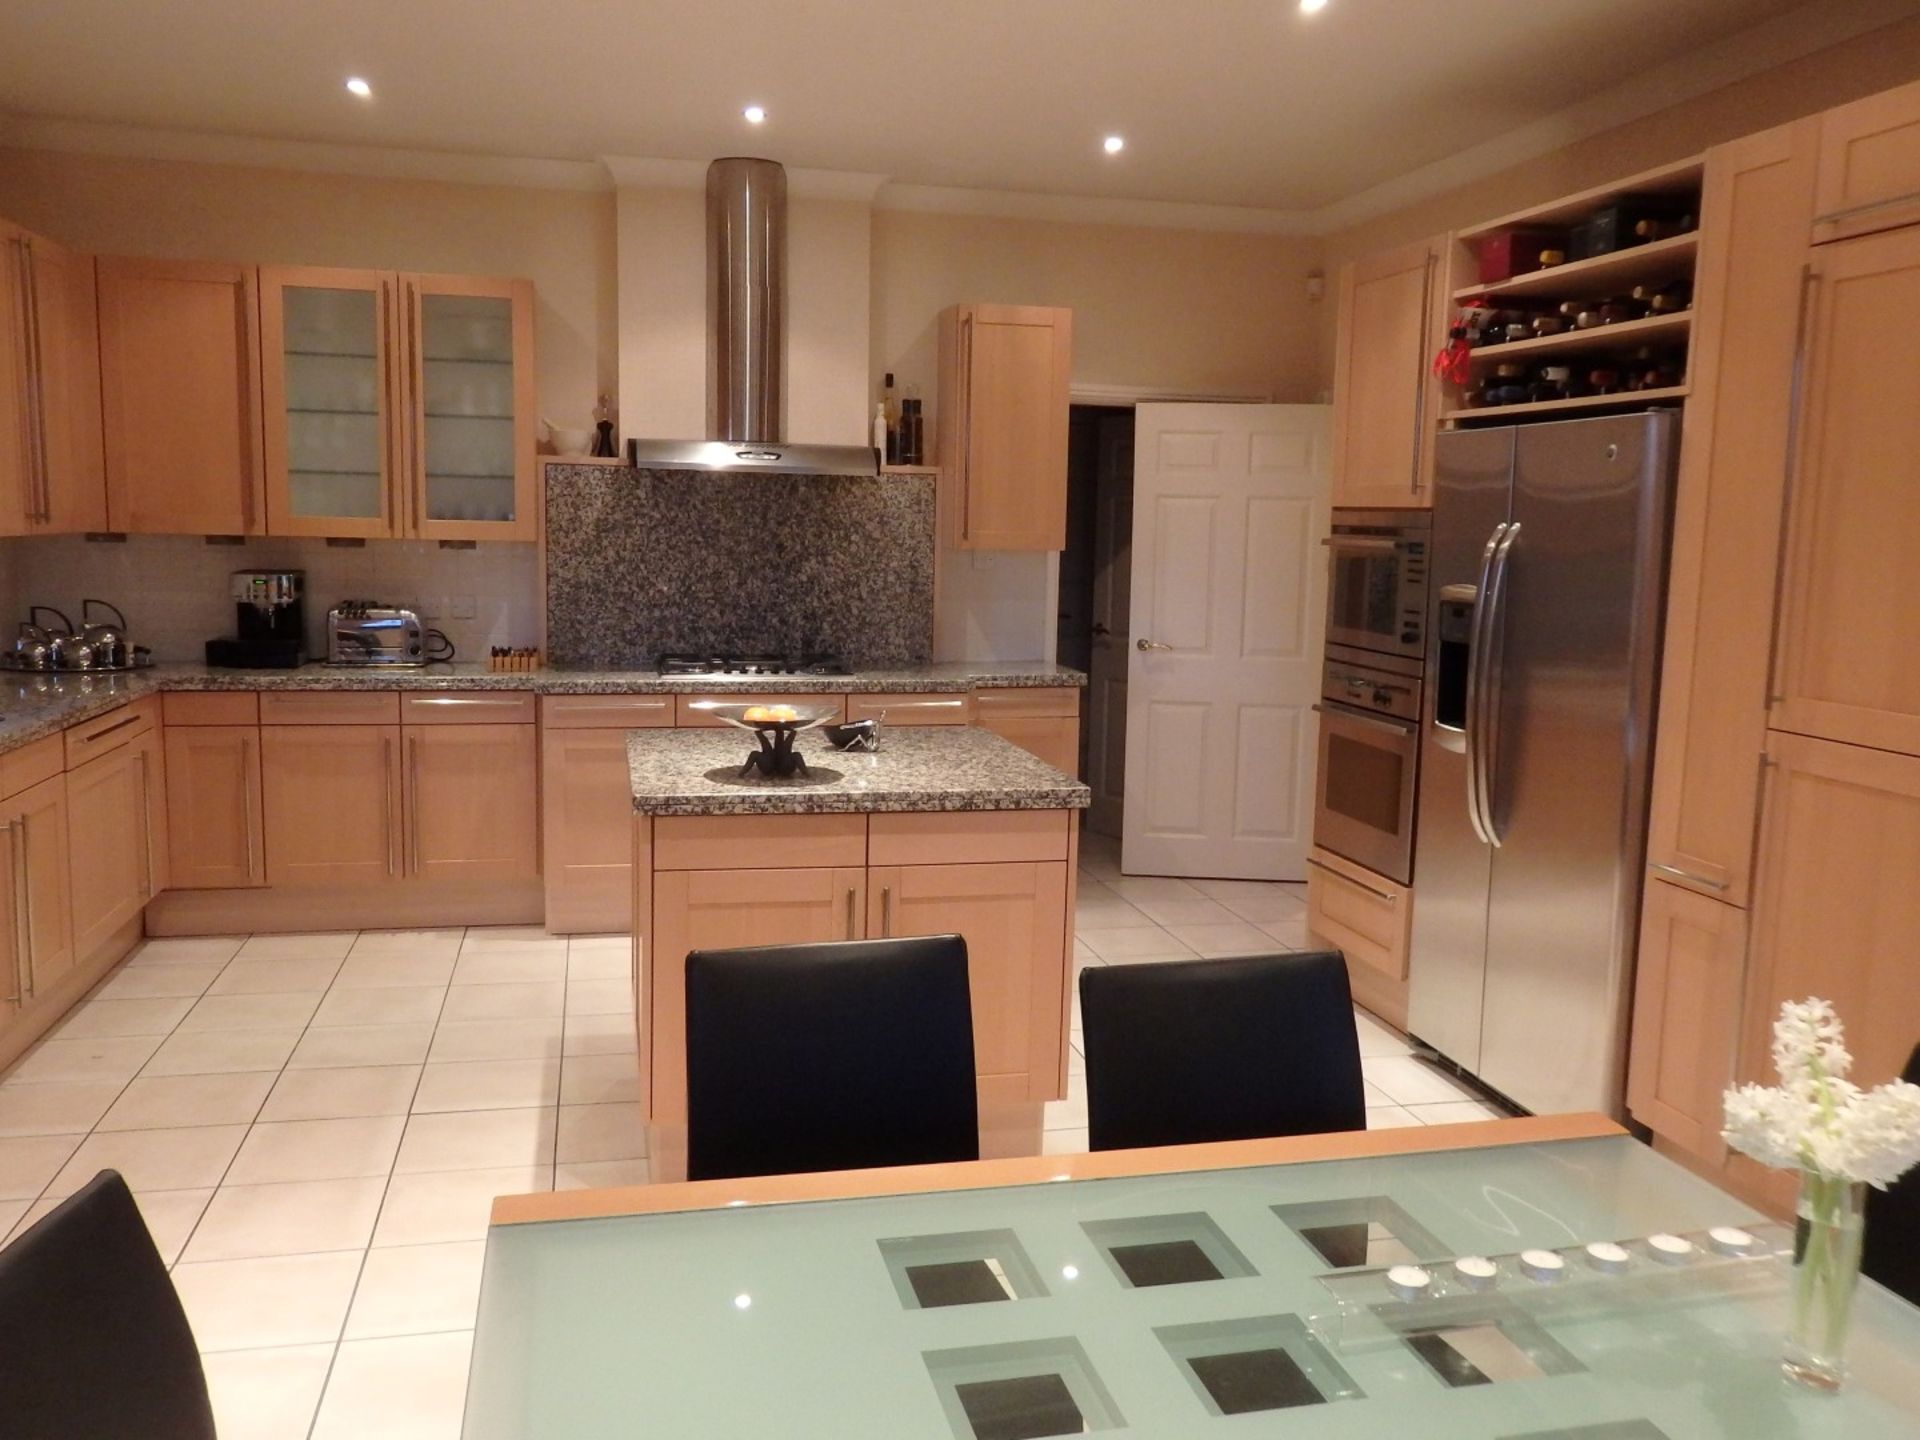 1 x Siematic Fitted Kitchen With Beech Shaker Style Doors, Granite Worktops, Central Island and - Image 9 of 148